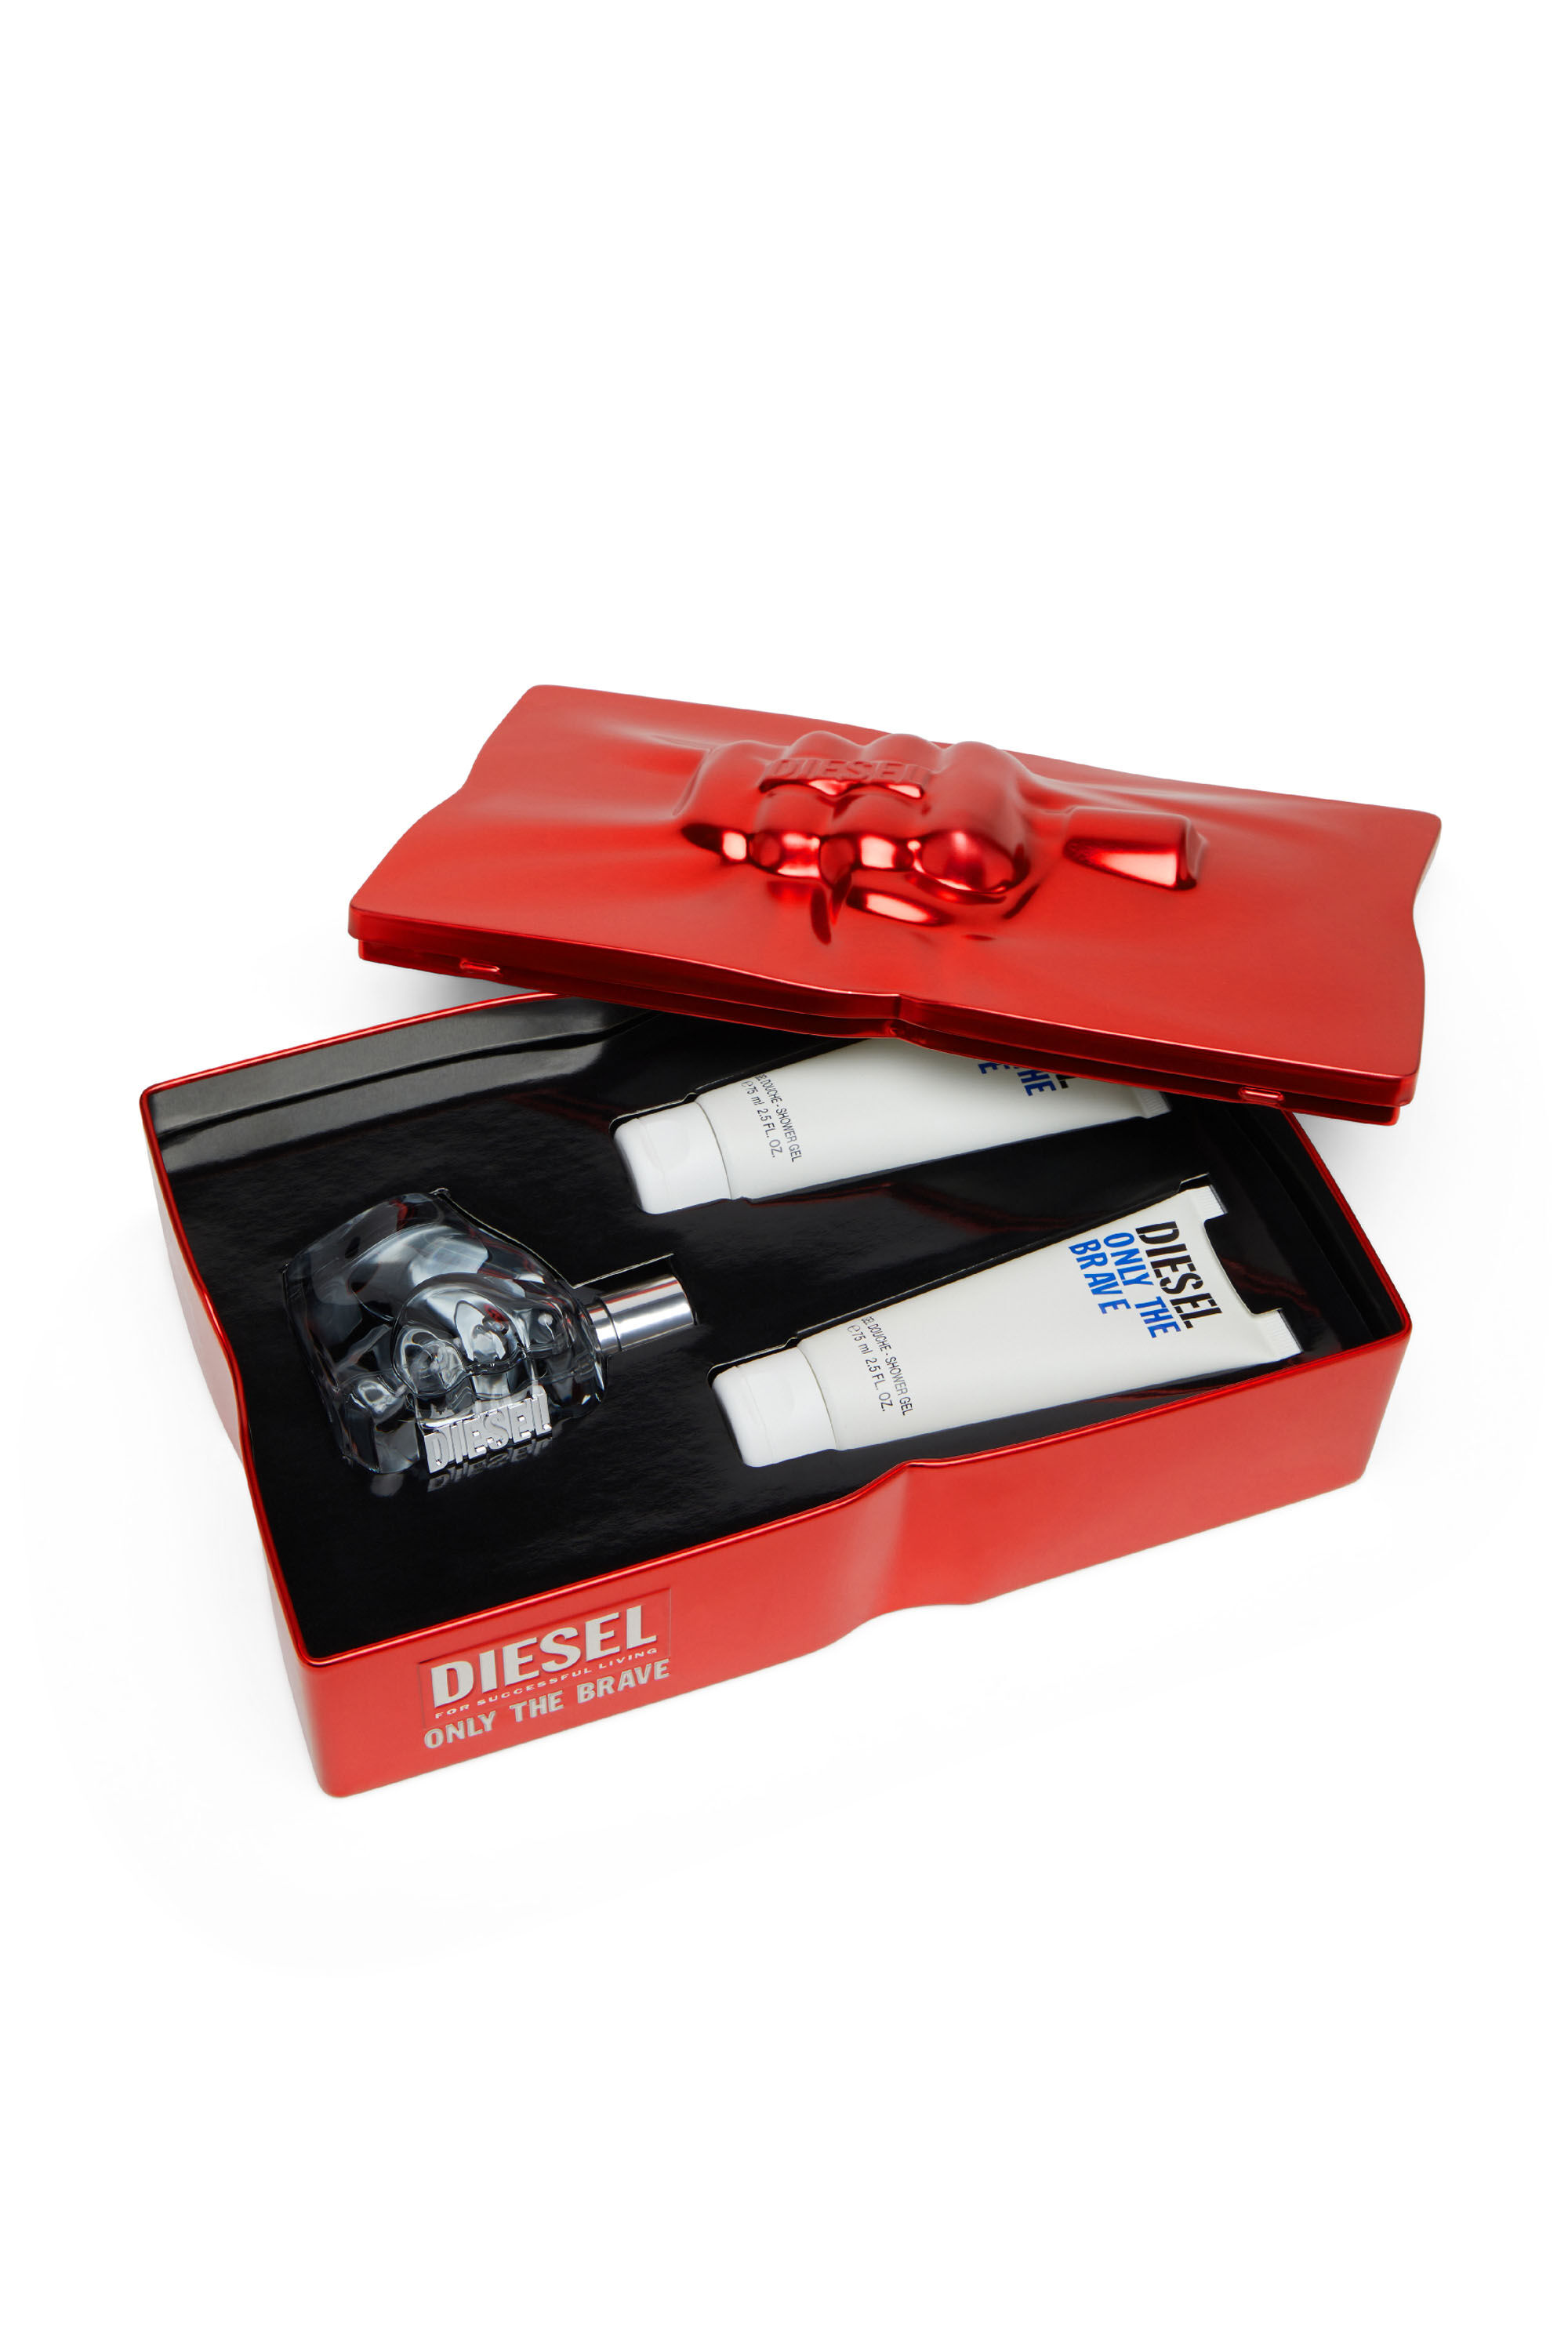 Diesel - ONLY THE BRAVE 75 ML PREMIUM GIFT SET, Rosso - Image 2